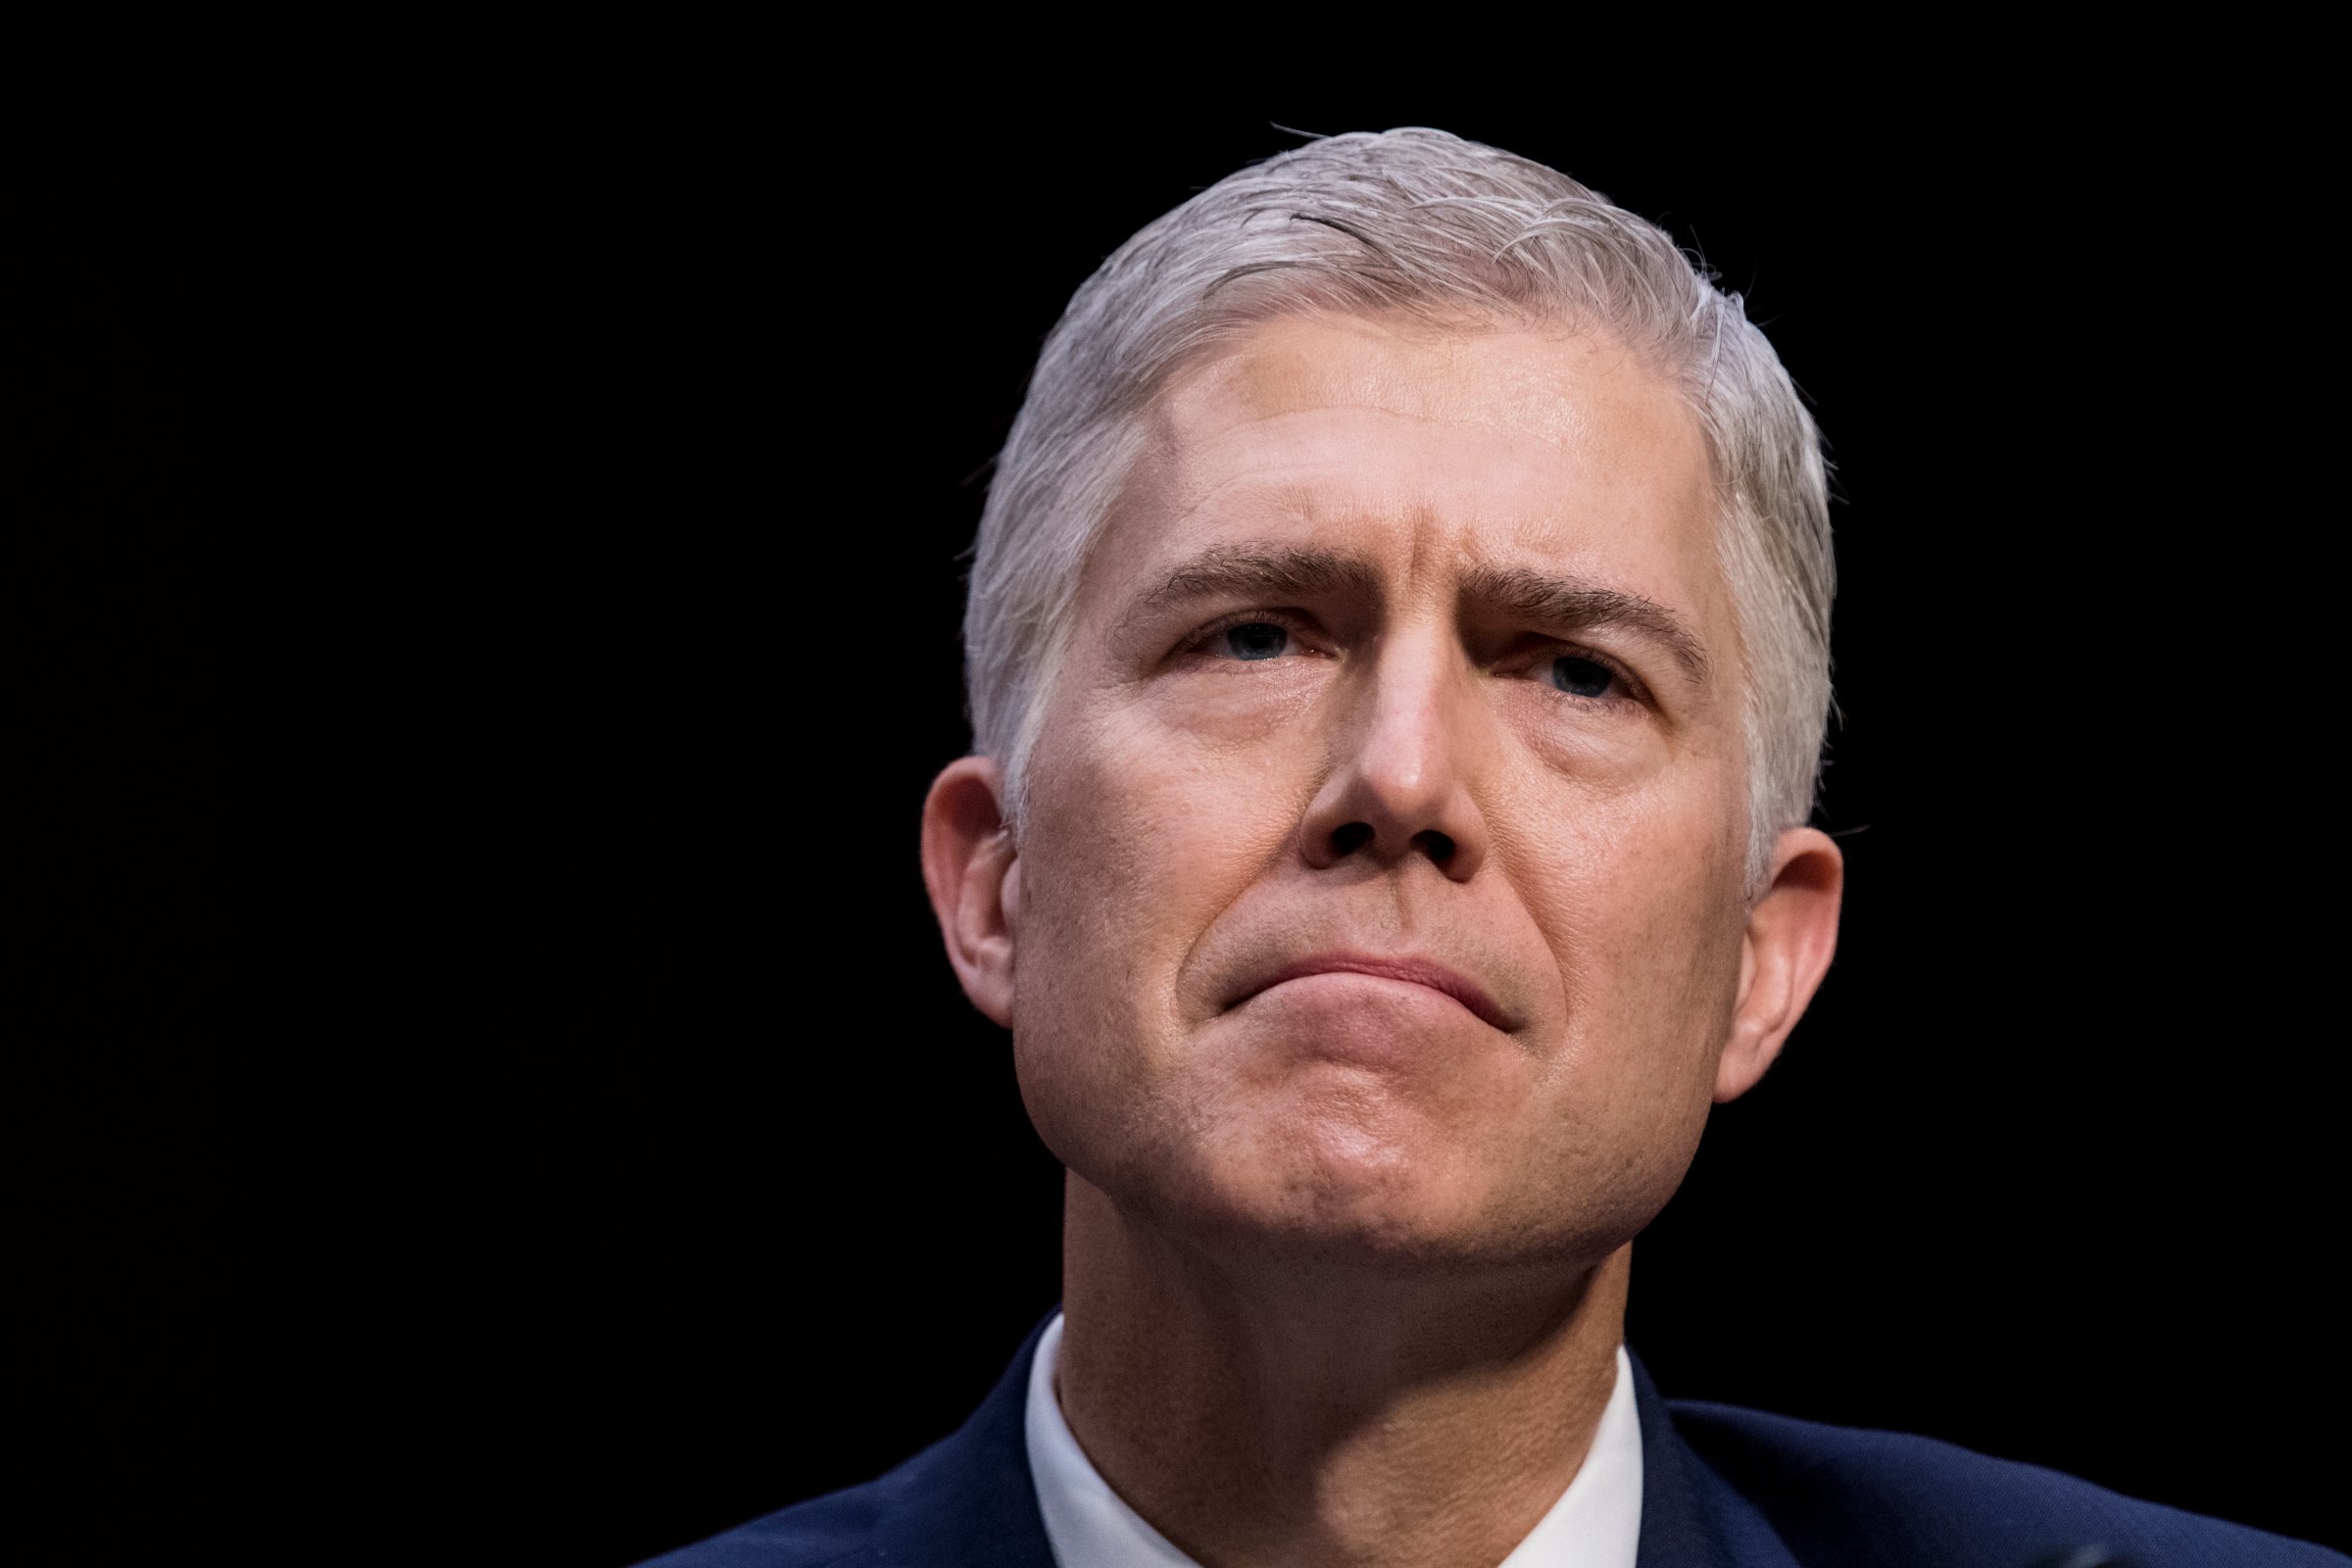 Neil Gorsuch, nominee to be Associate Justice of the U.S. Supreme Court, listens to Senators' opening statements during the first day of the Senate Judiciary Committee confirmation hearings on Monday, March 20, 2017.